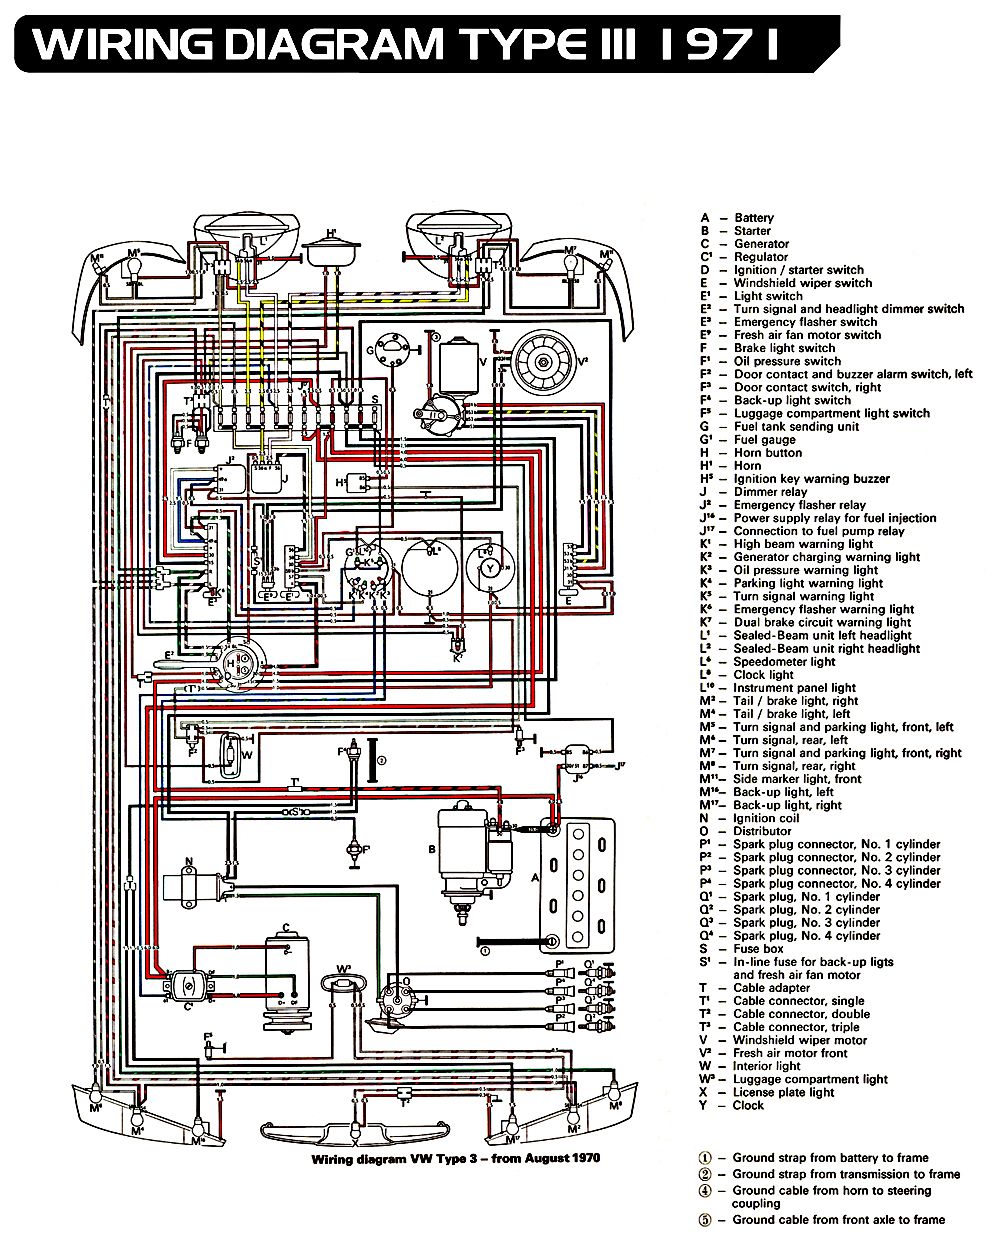 1971 Type 3 VW Wiring Diagramso simple compared to a modern ecu